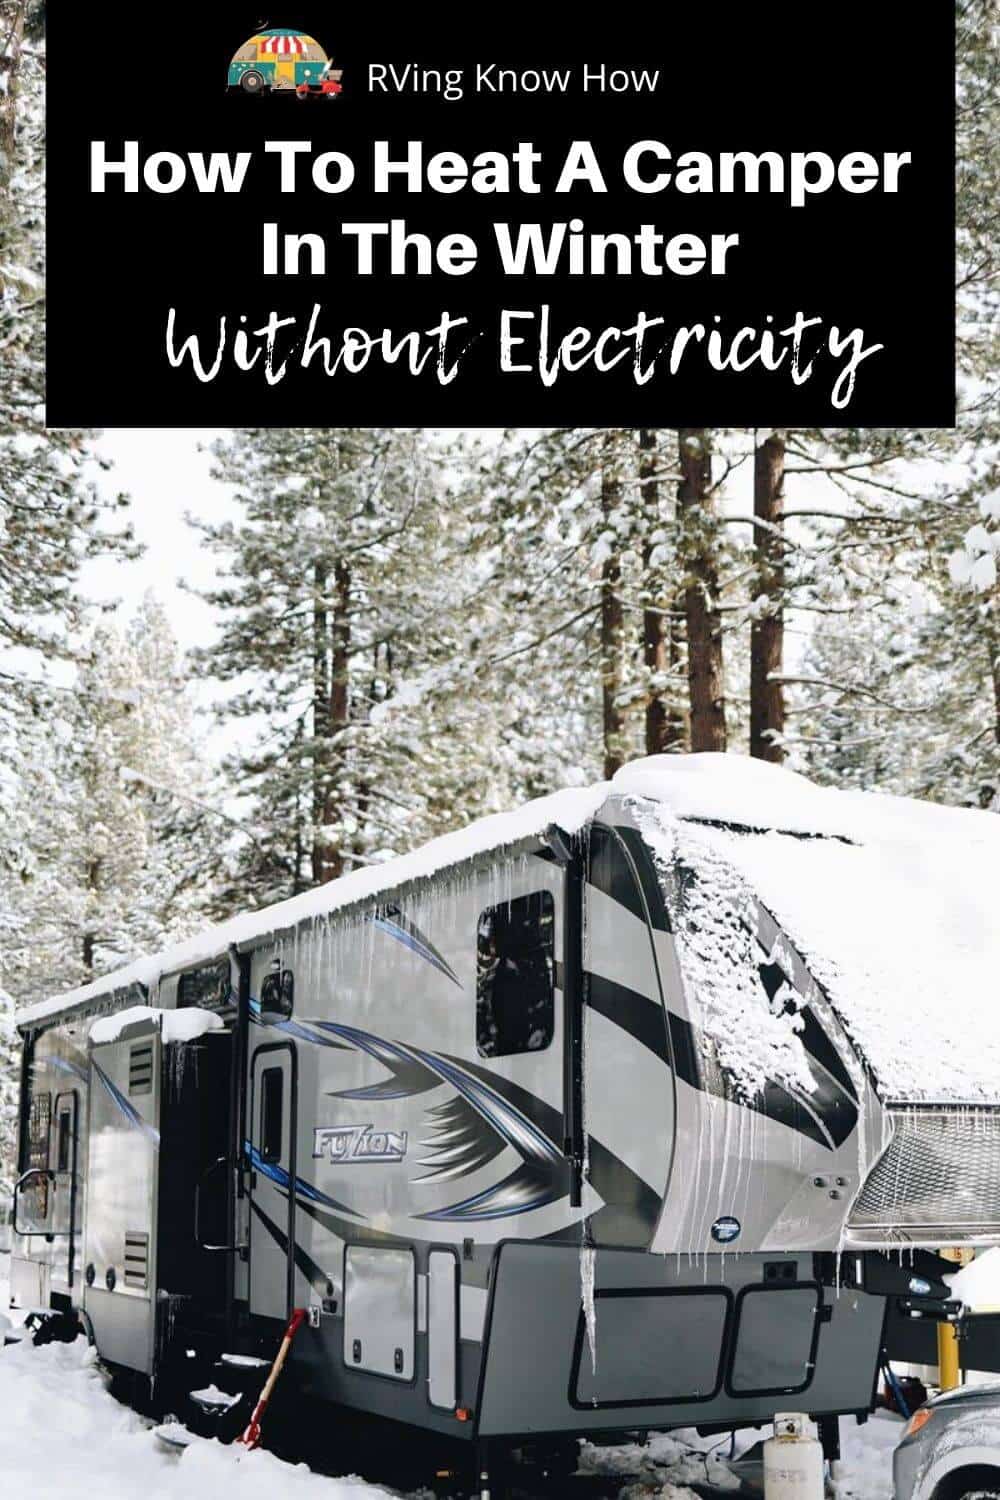 How To Keep Warm In The Winter In an RV Without Electricity while boondocking